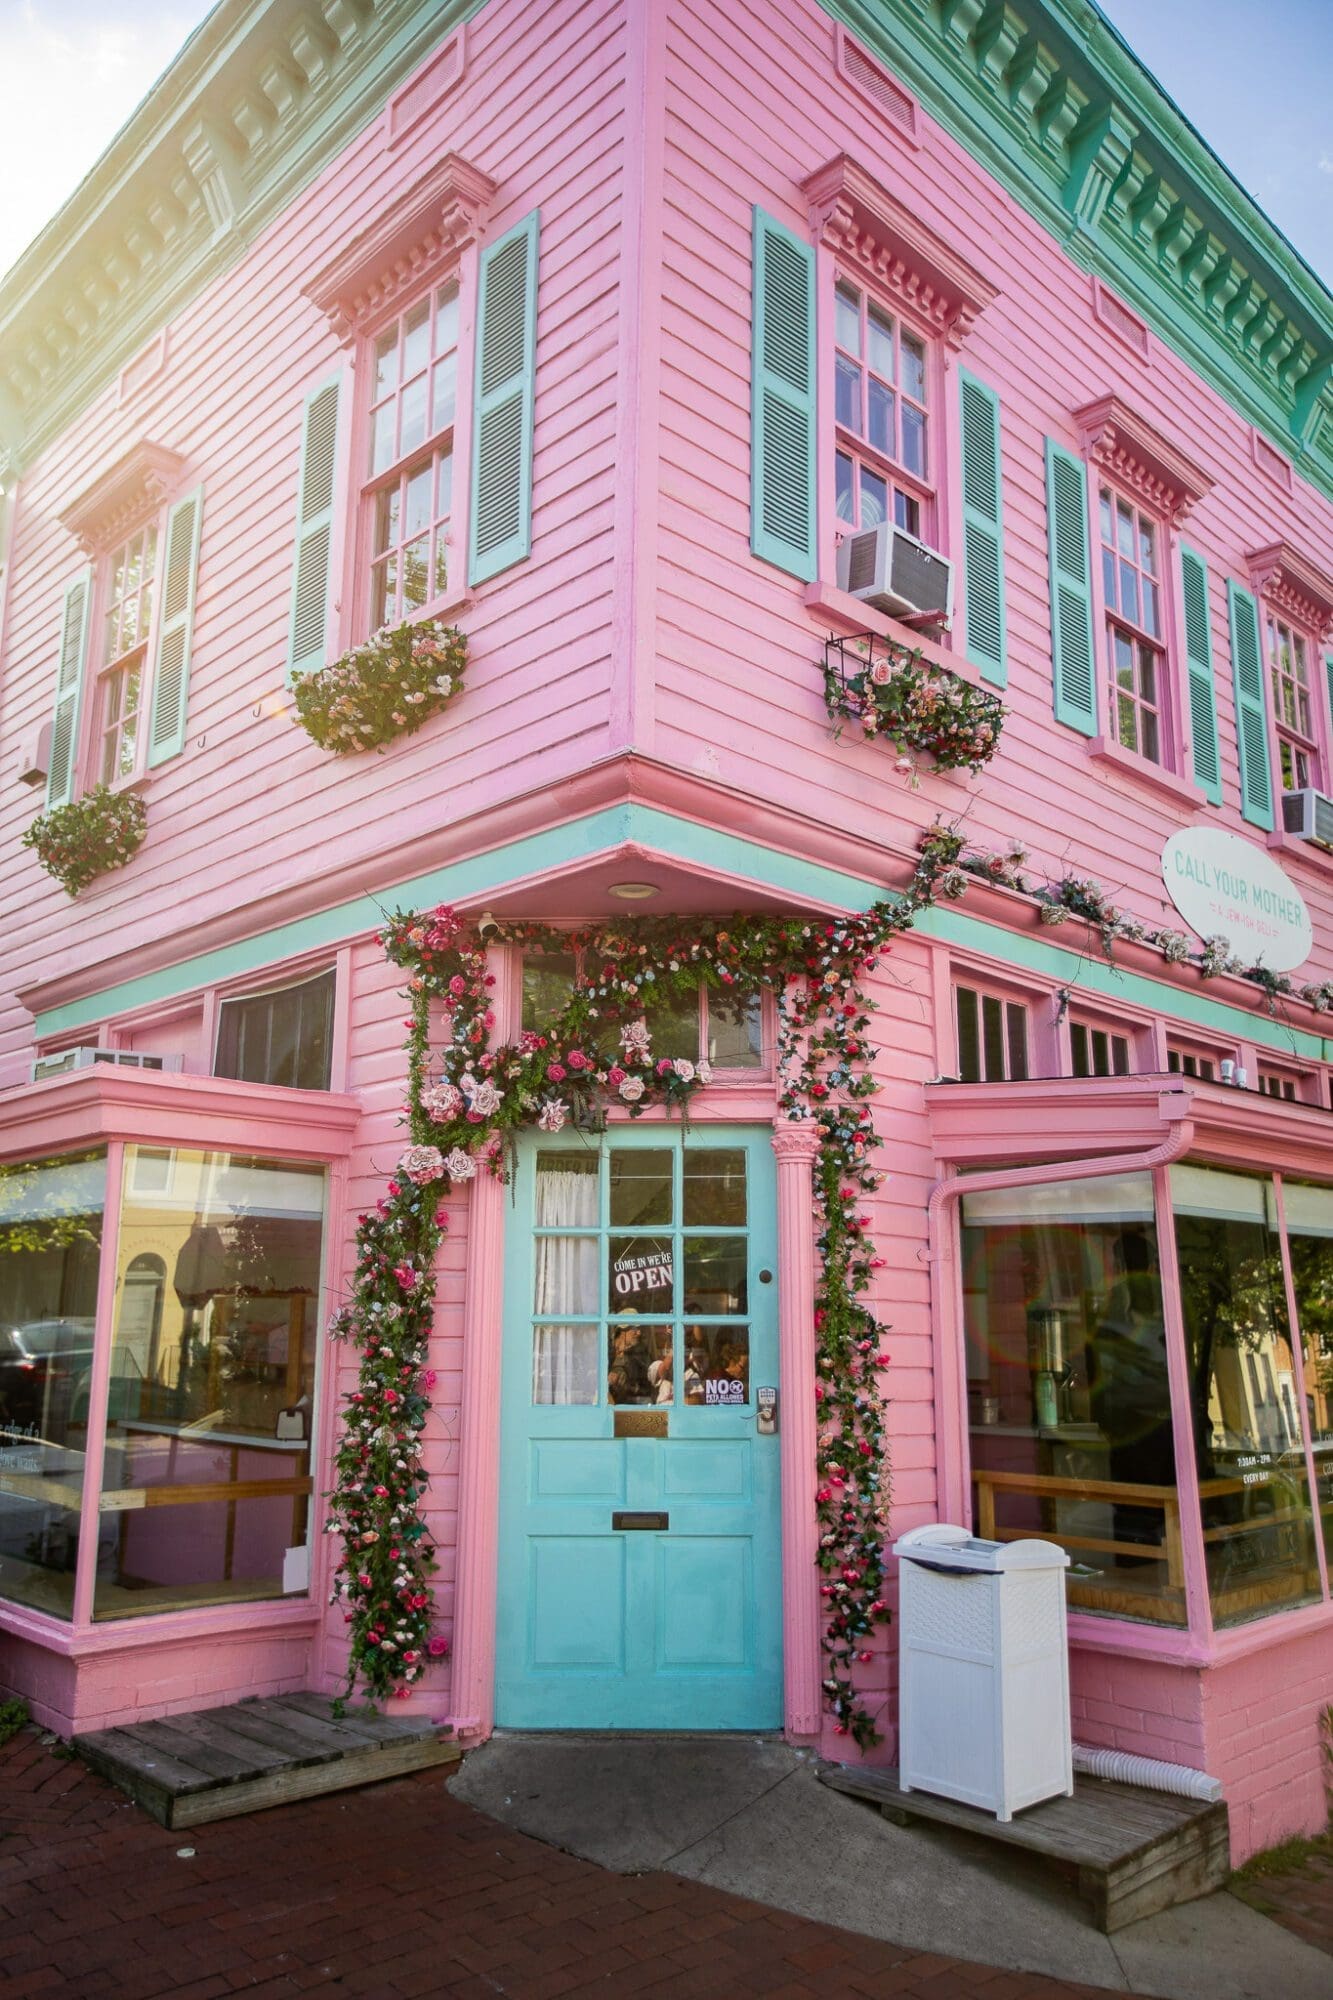 Pink Instagrammable Building Explore Georgetown Washington DC Things to do Sightseeing